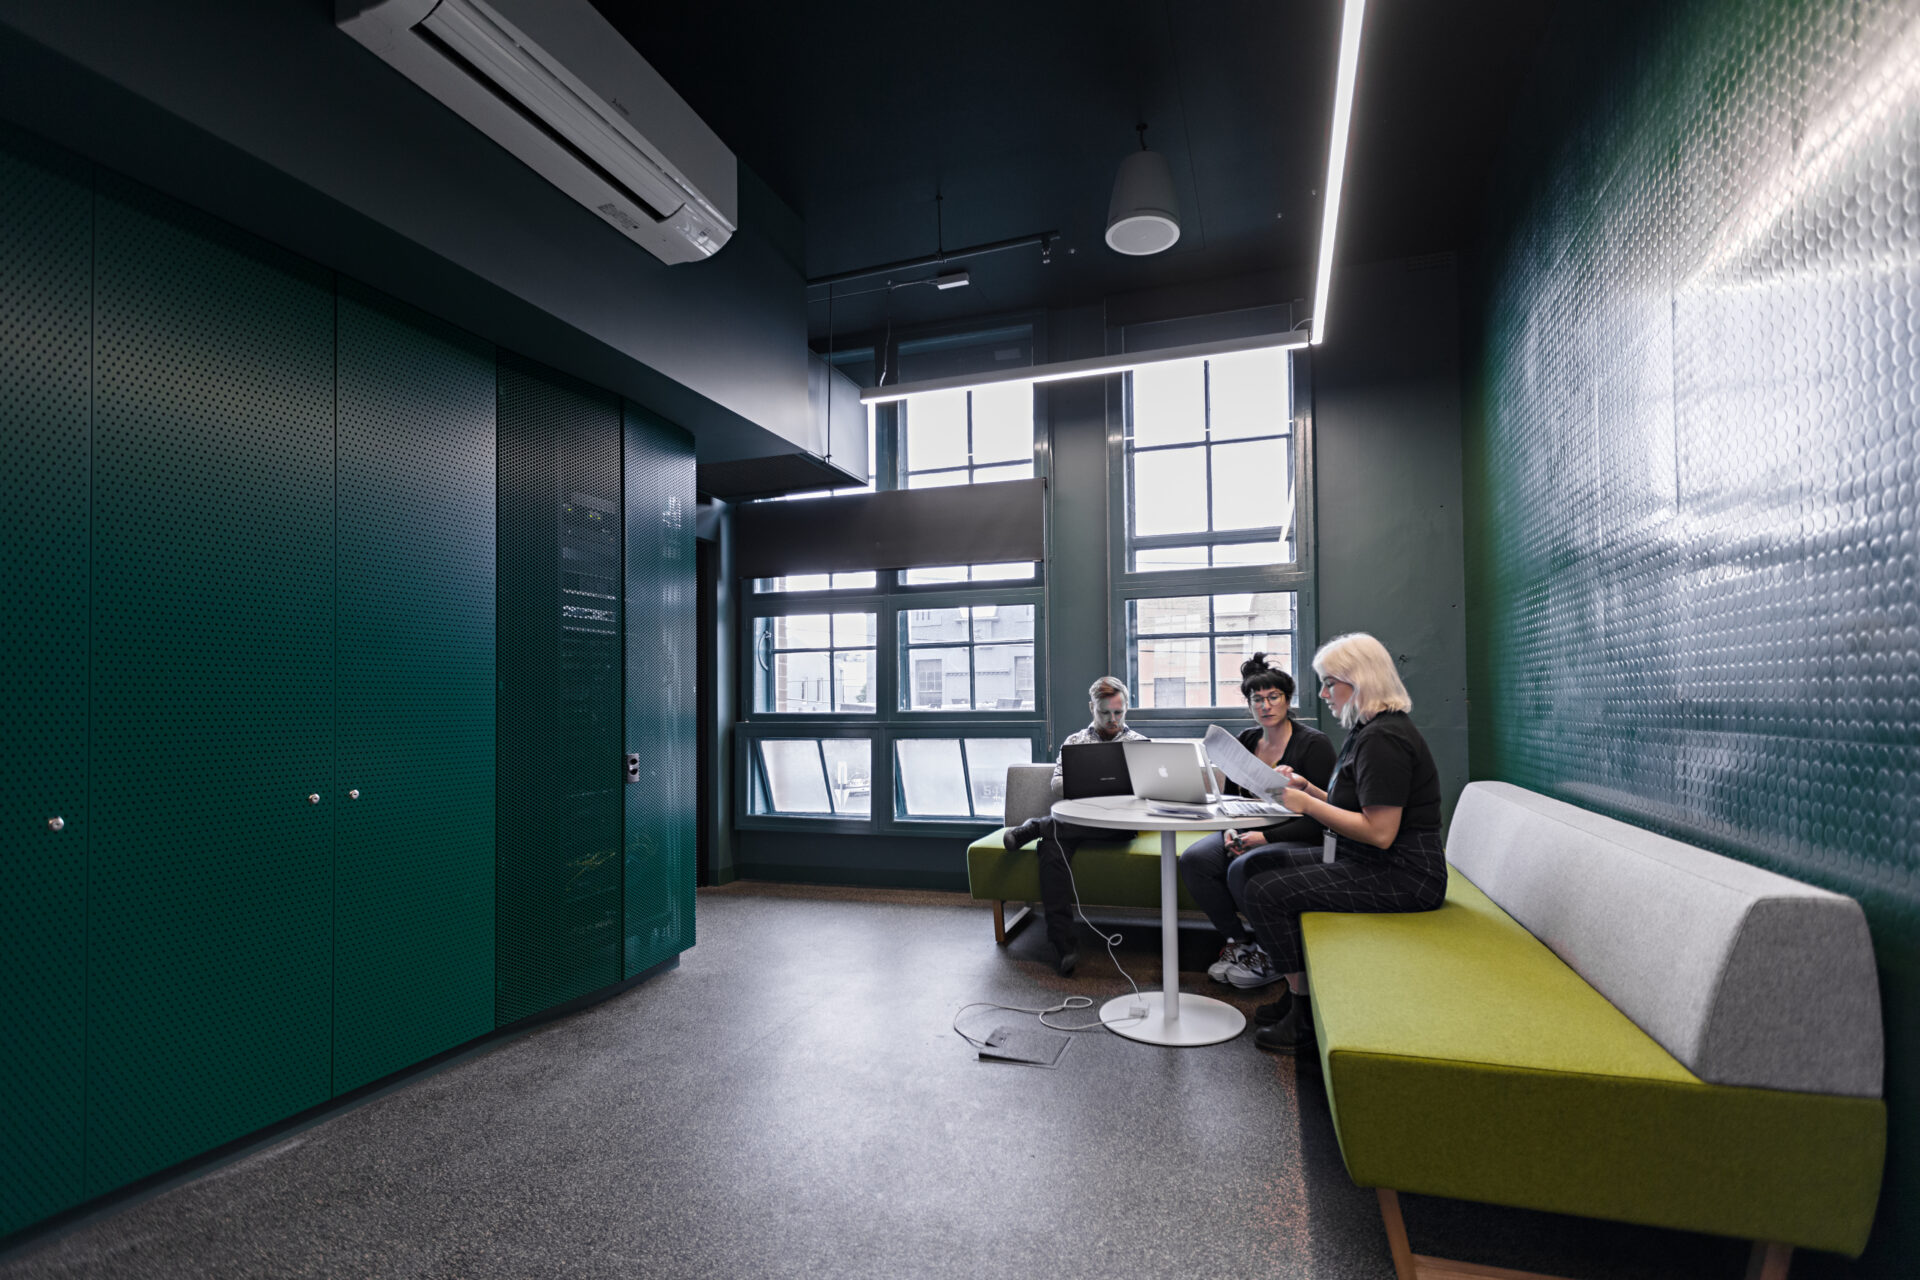 Dark meeting room with dark green walls and bright green and grey couch to the right. Three people are meeting at a table in the corner using laptops and paper, with large window panels behind them.